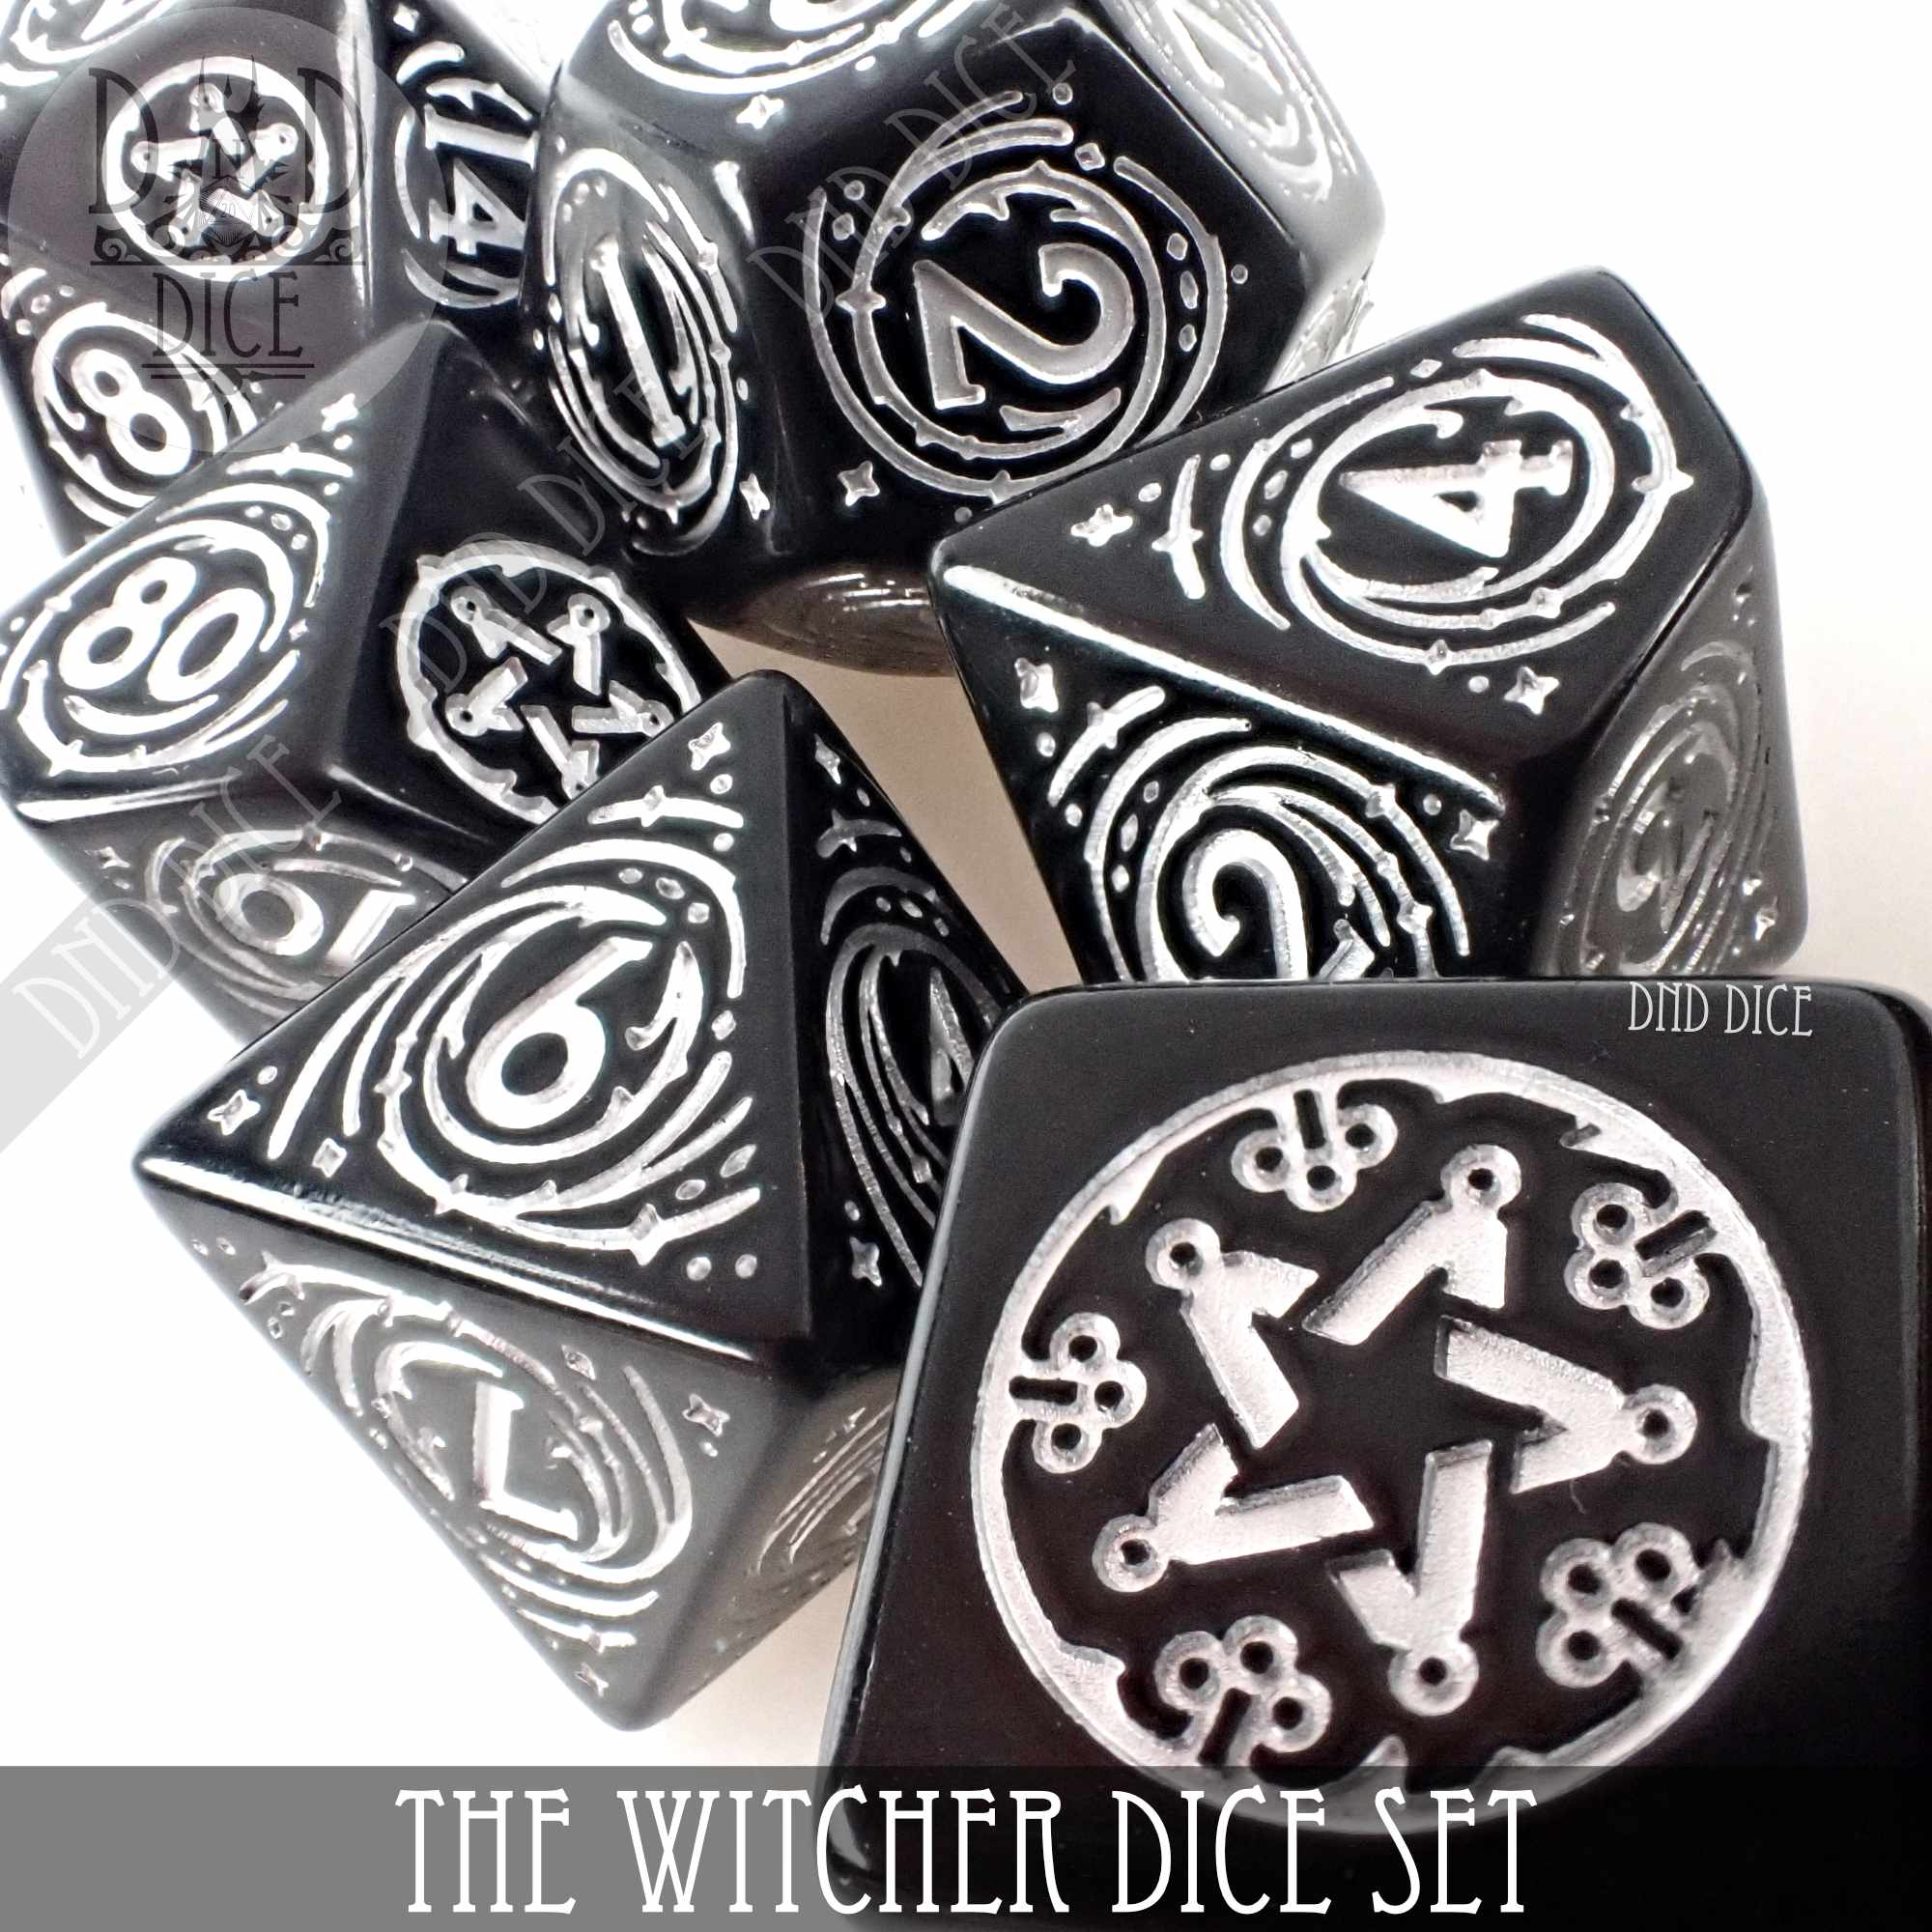 The Witcher Dice Set and Coin - Yennefer